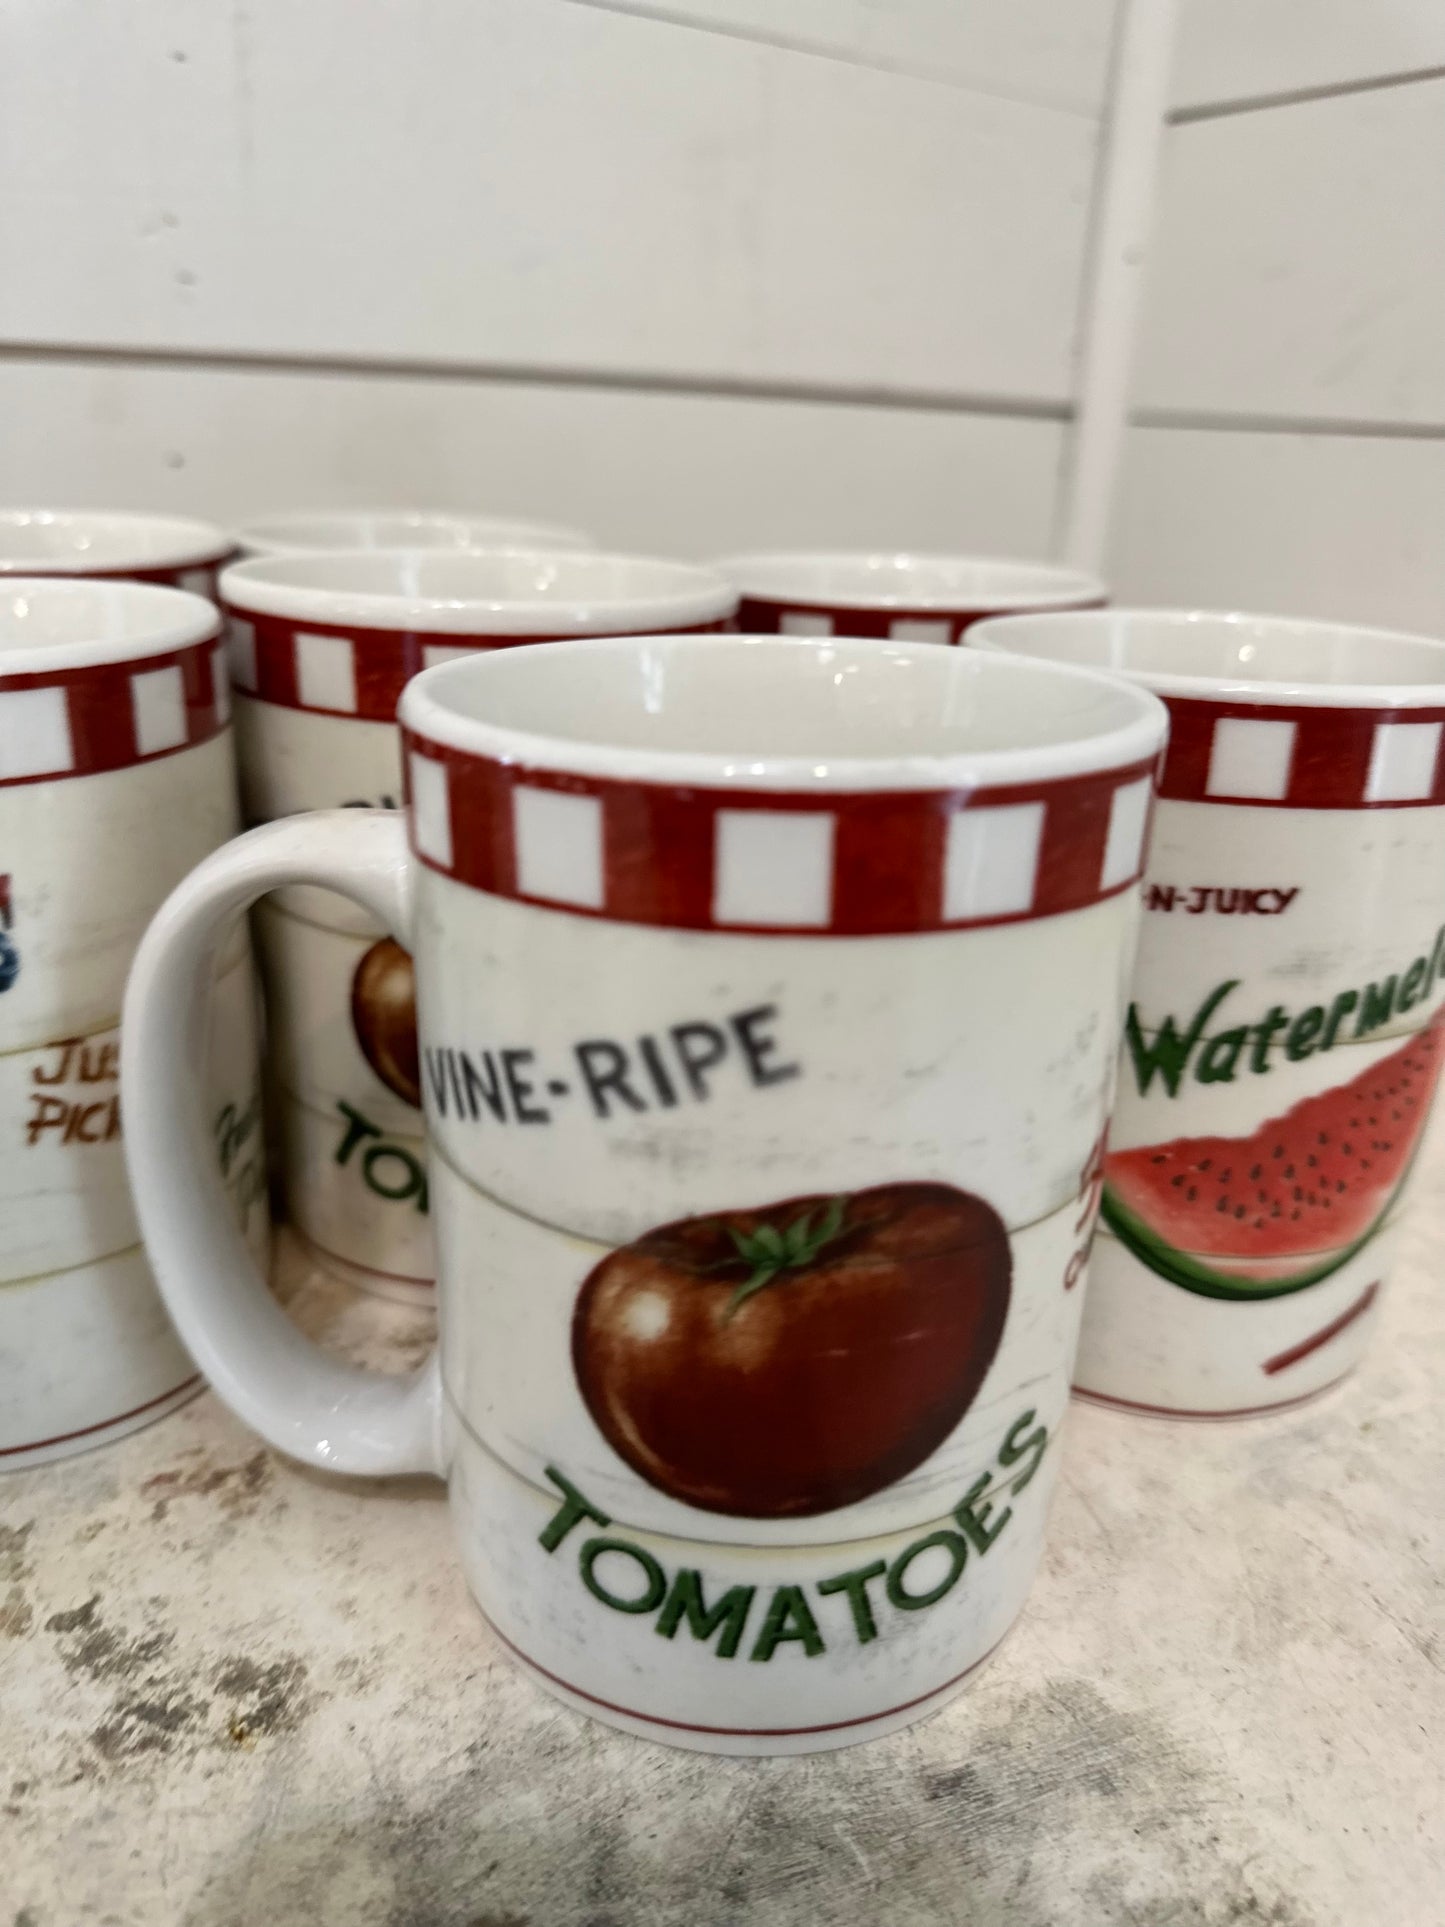 Home Trend Farm Stand Mugs Sold Individually